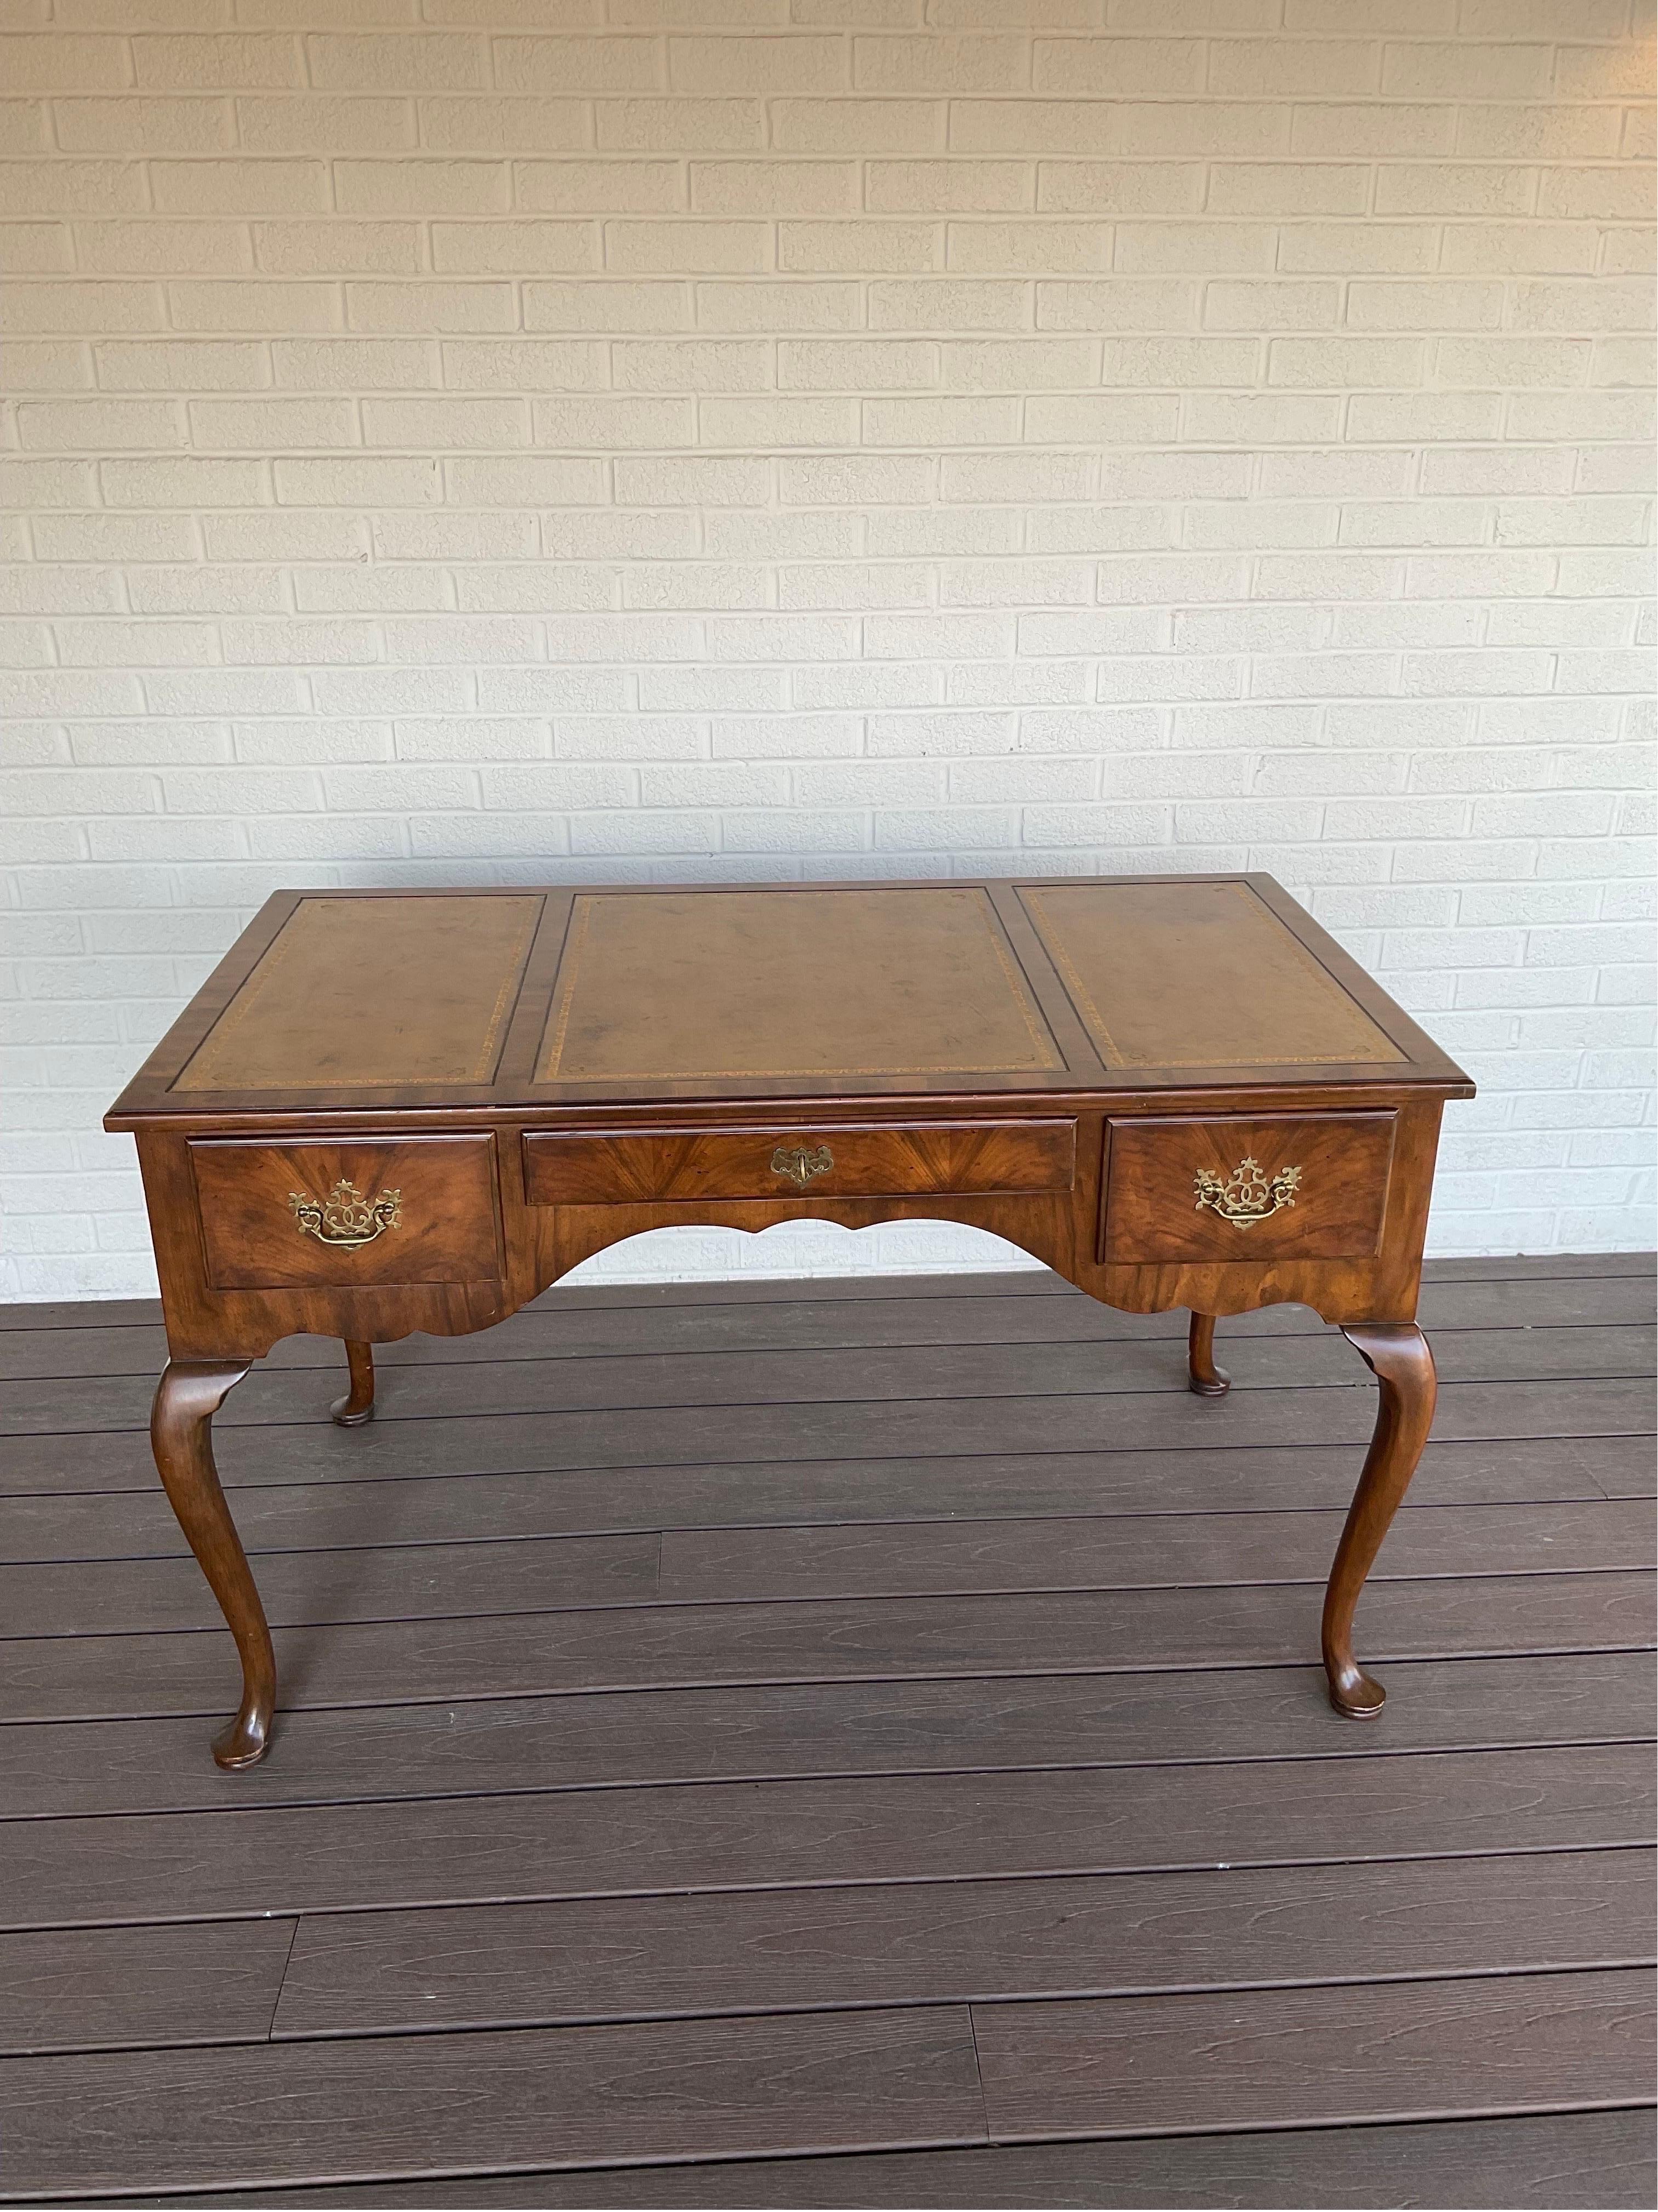 Beautiful example of this intentionally distressed leather top Queen Ann Desk with cabriolet legs and key from Baker furniture. One owner find. Signed and numbered piece. Extraordinary grains and patina.

Condition Disclosure:
Please understand